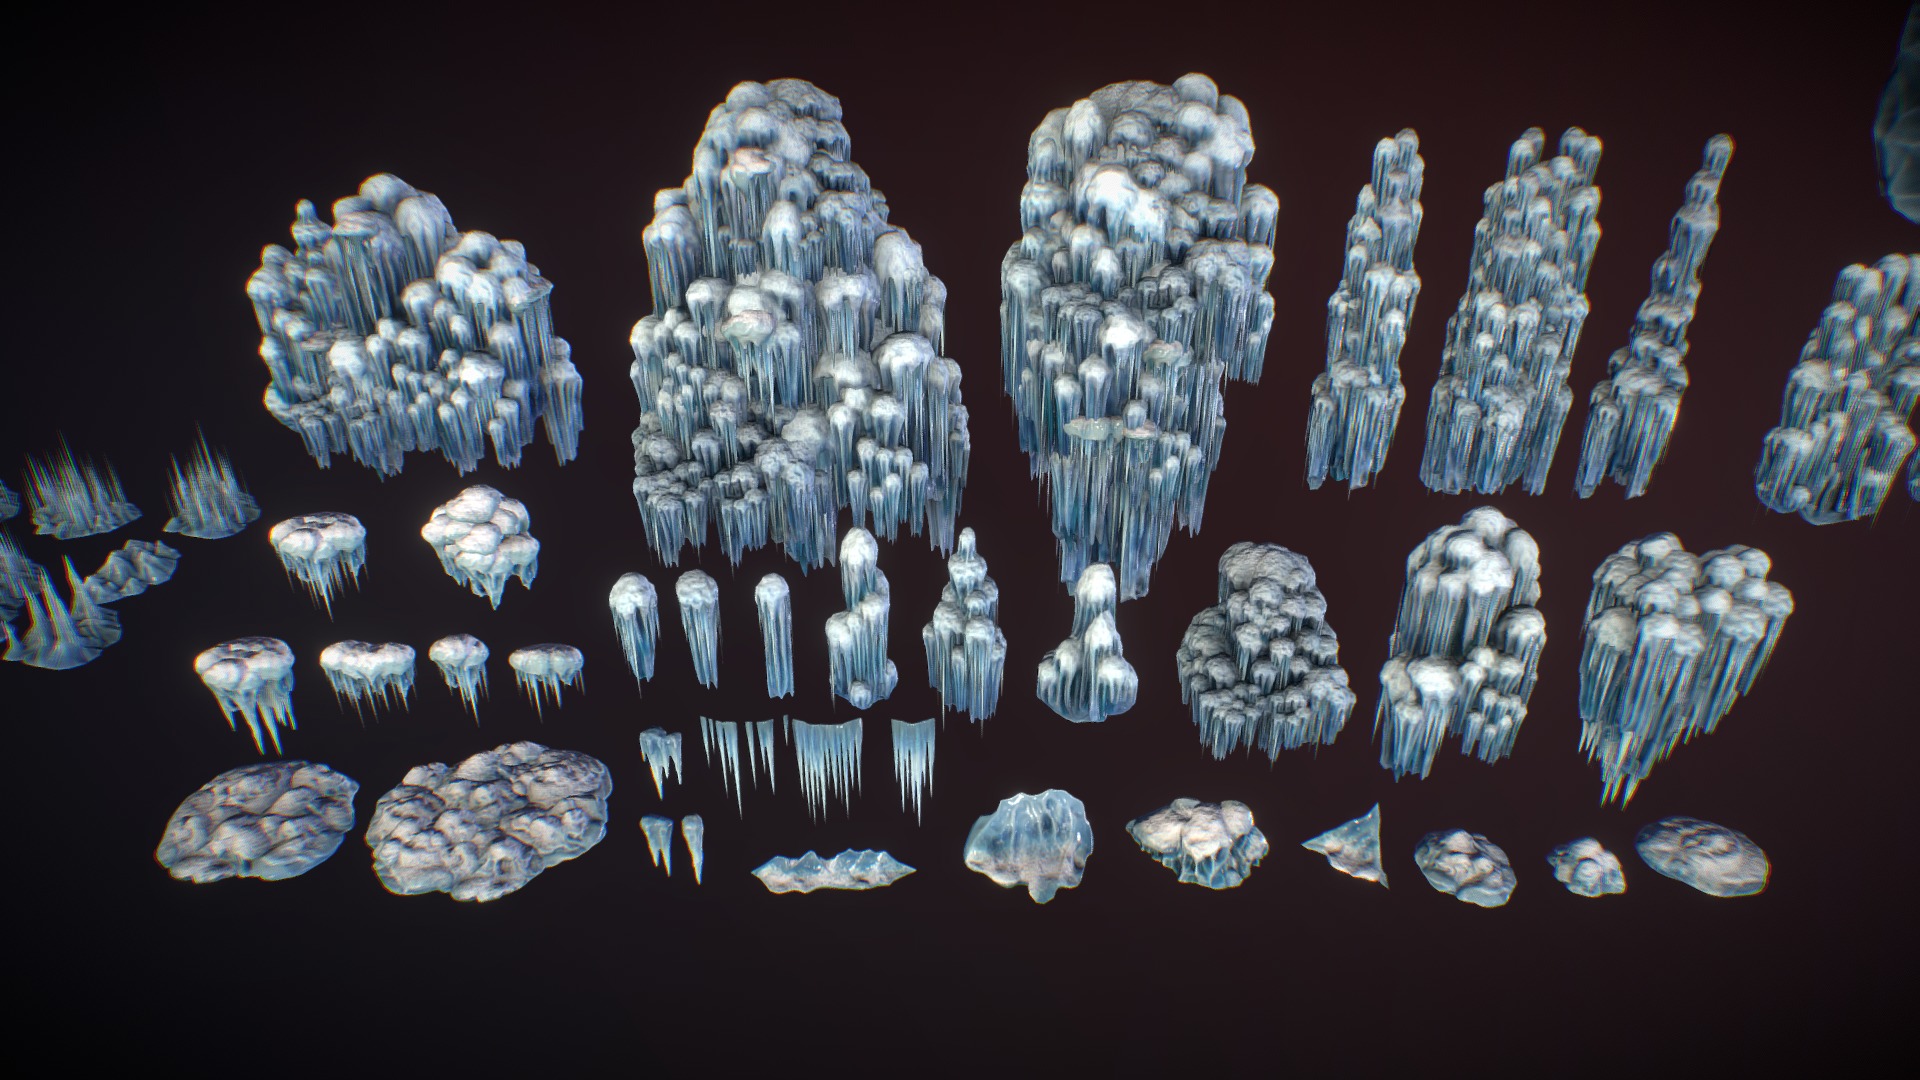 3D model Snow pillars - This is a 3D model of the Snow pillars. The 3D model is about a group of blue and white jellyfish.